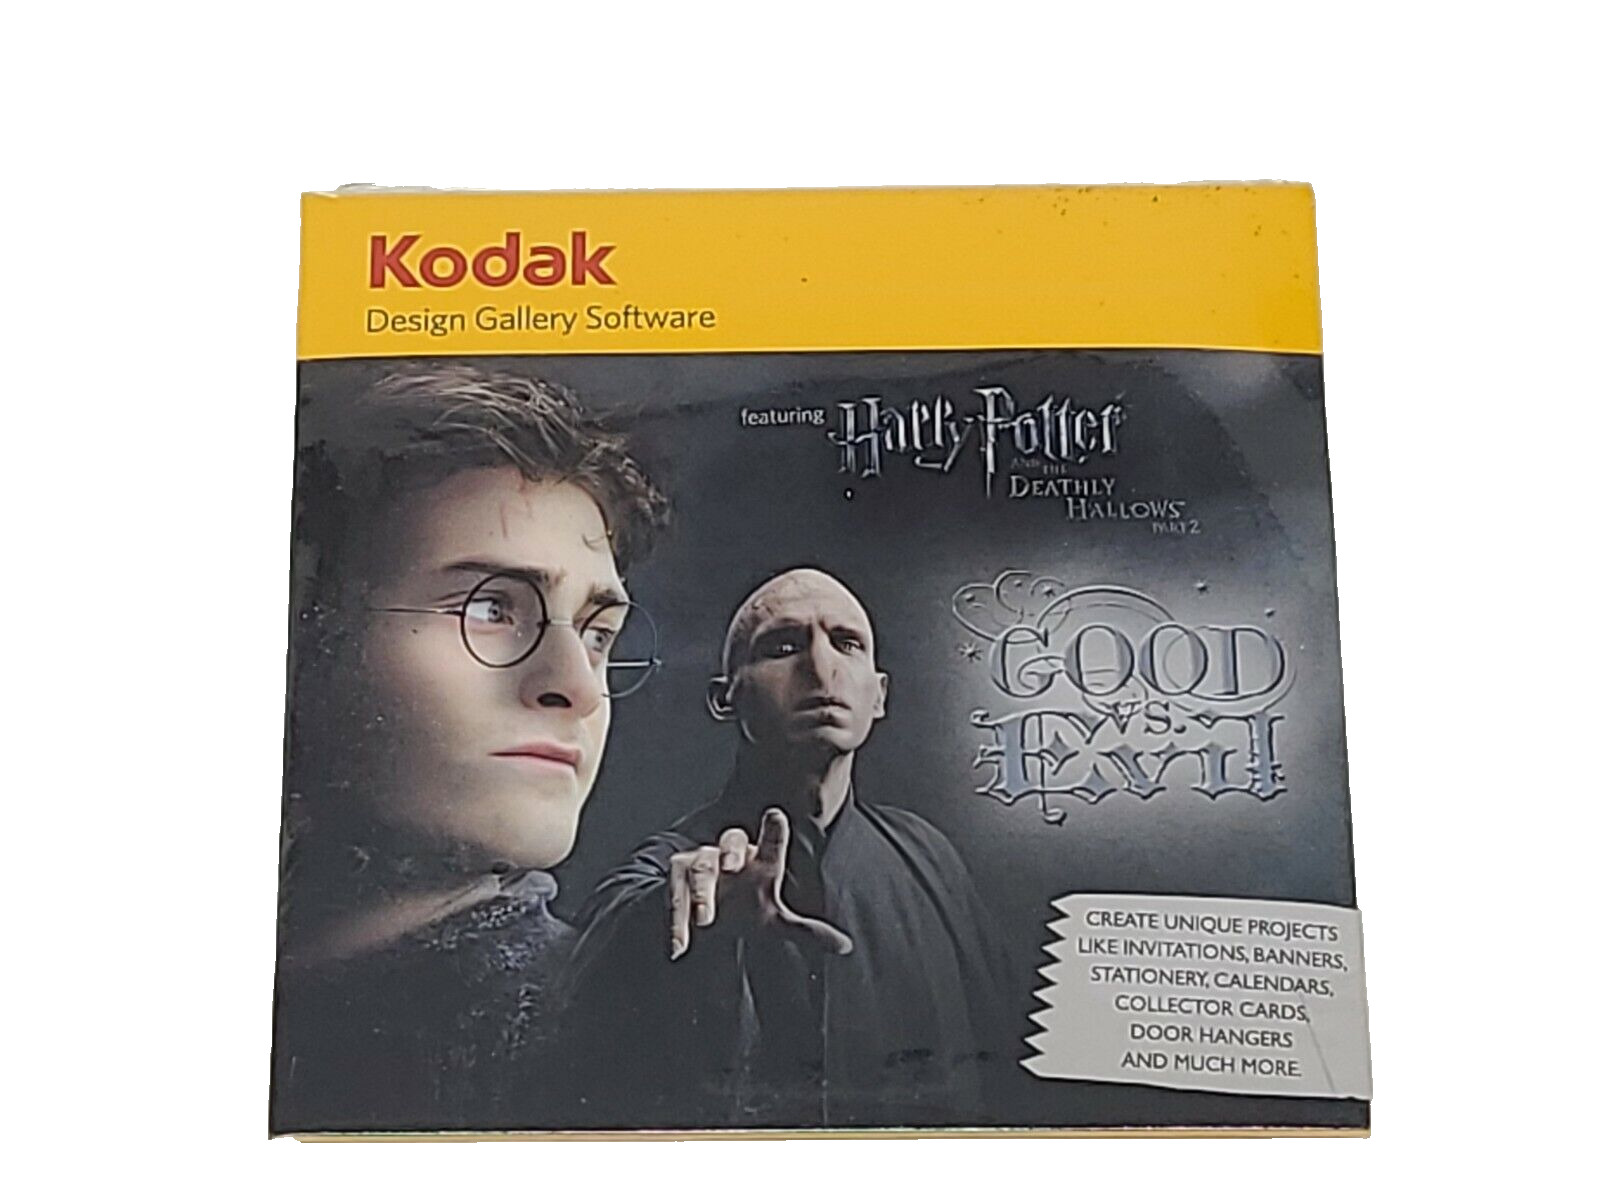 New Kodak Design Gallery Software: Harry Potter and the Deathly Hallows 2011